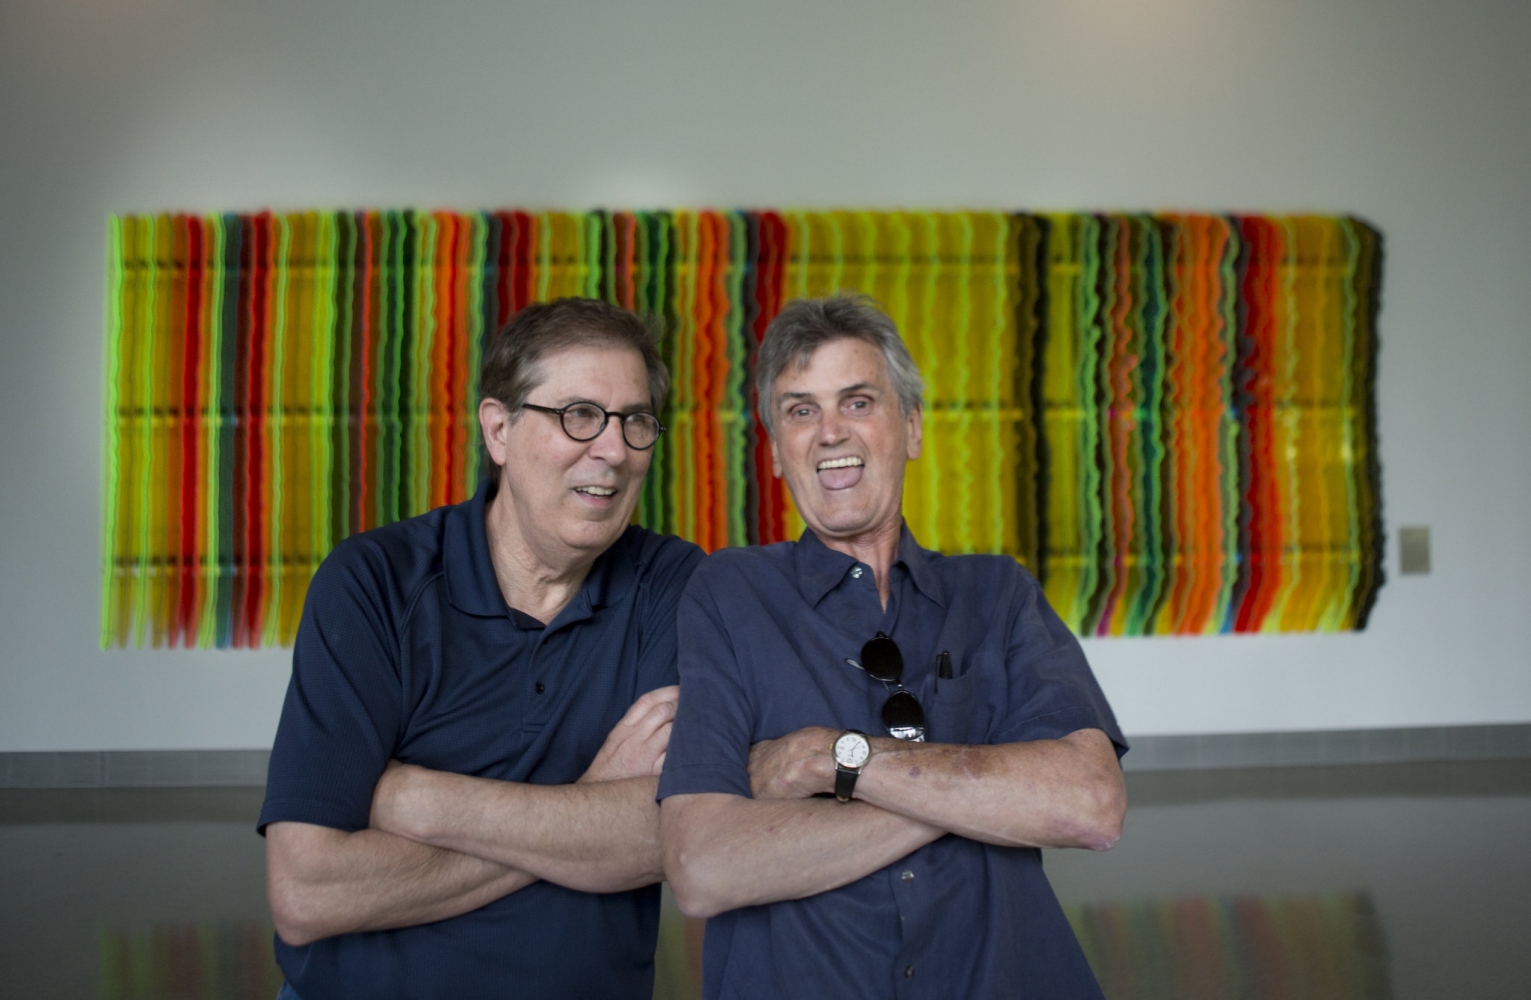 The Kingsmen&amp;#39;s&amp;nbsp;Dick Peterson (left)&amp;nbsp;and Mike Mitchell (right)&amp;nbsp;in the Edith Green-Wendell Wyatt Federal Building&amp;nbsp;&amp;quot;Louie, Louie&amp;quot; sound waves